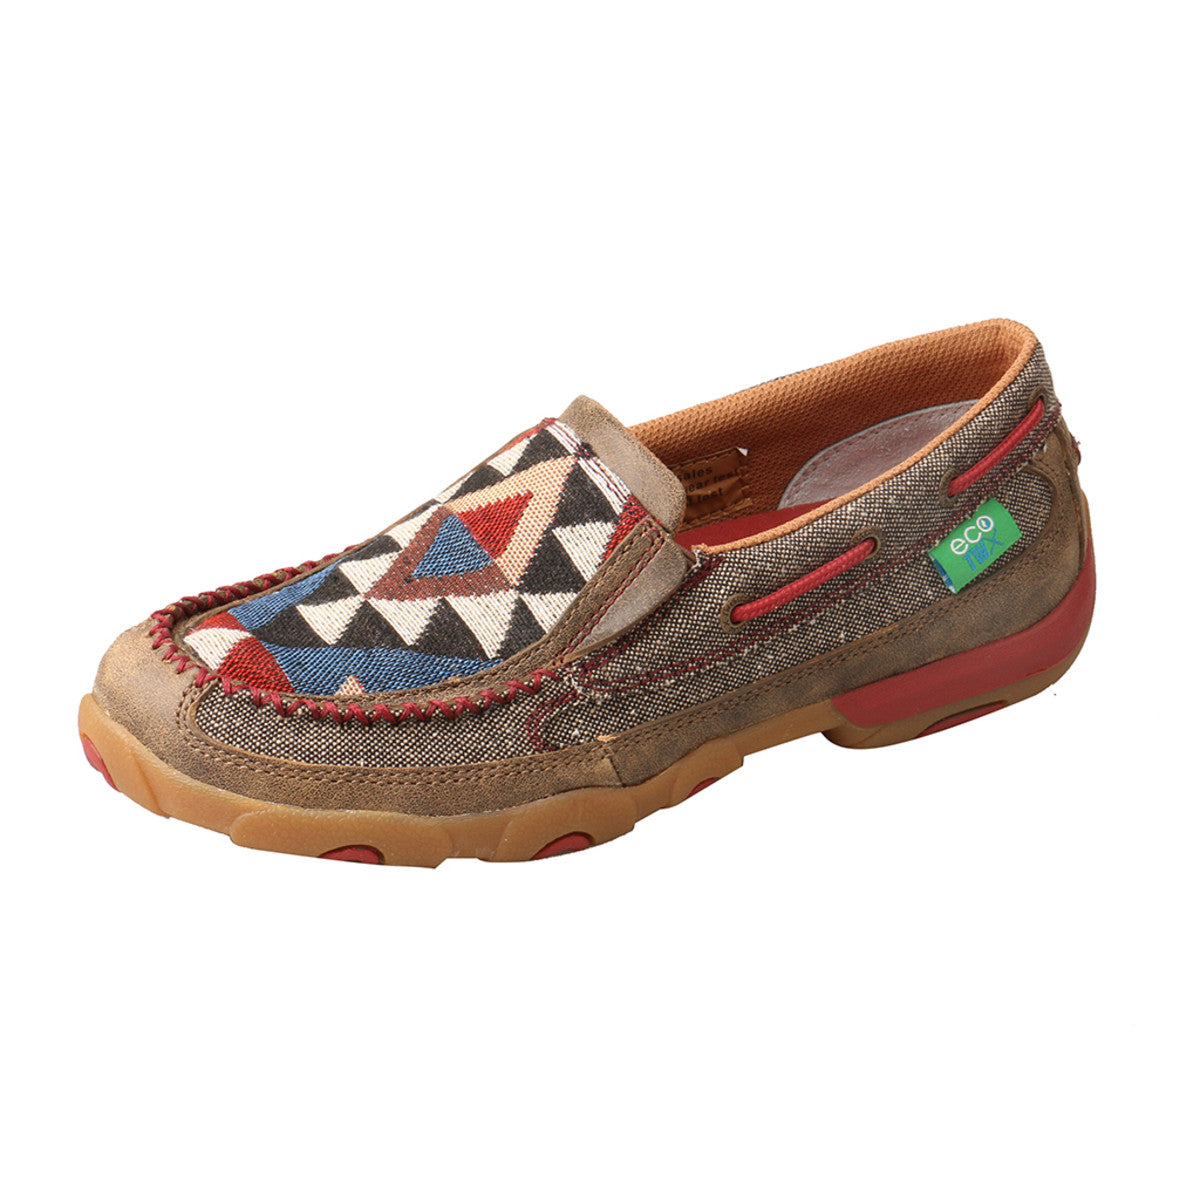 Women's Twisted X Slip-On Driving Moccasins Shoe in Dust & Multi from the side view